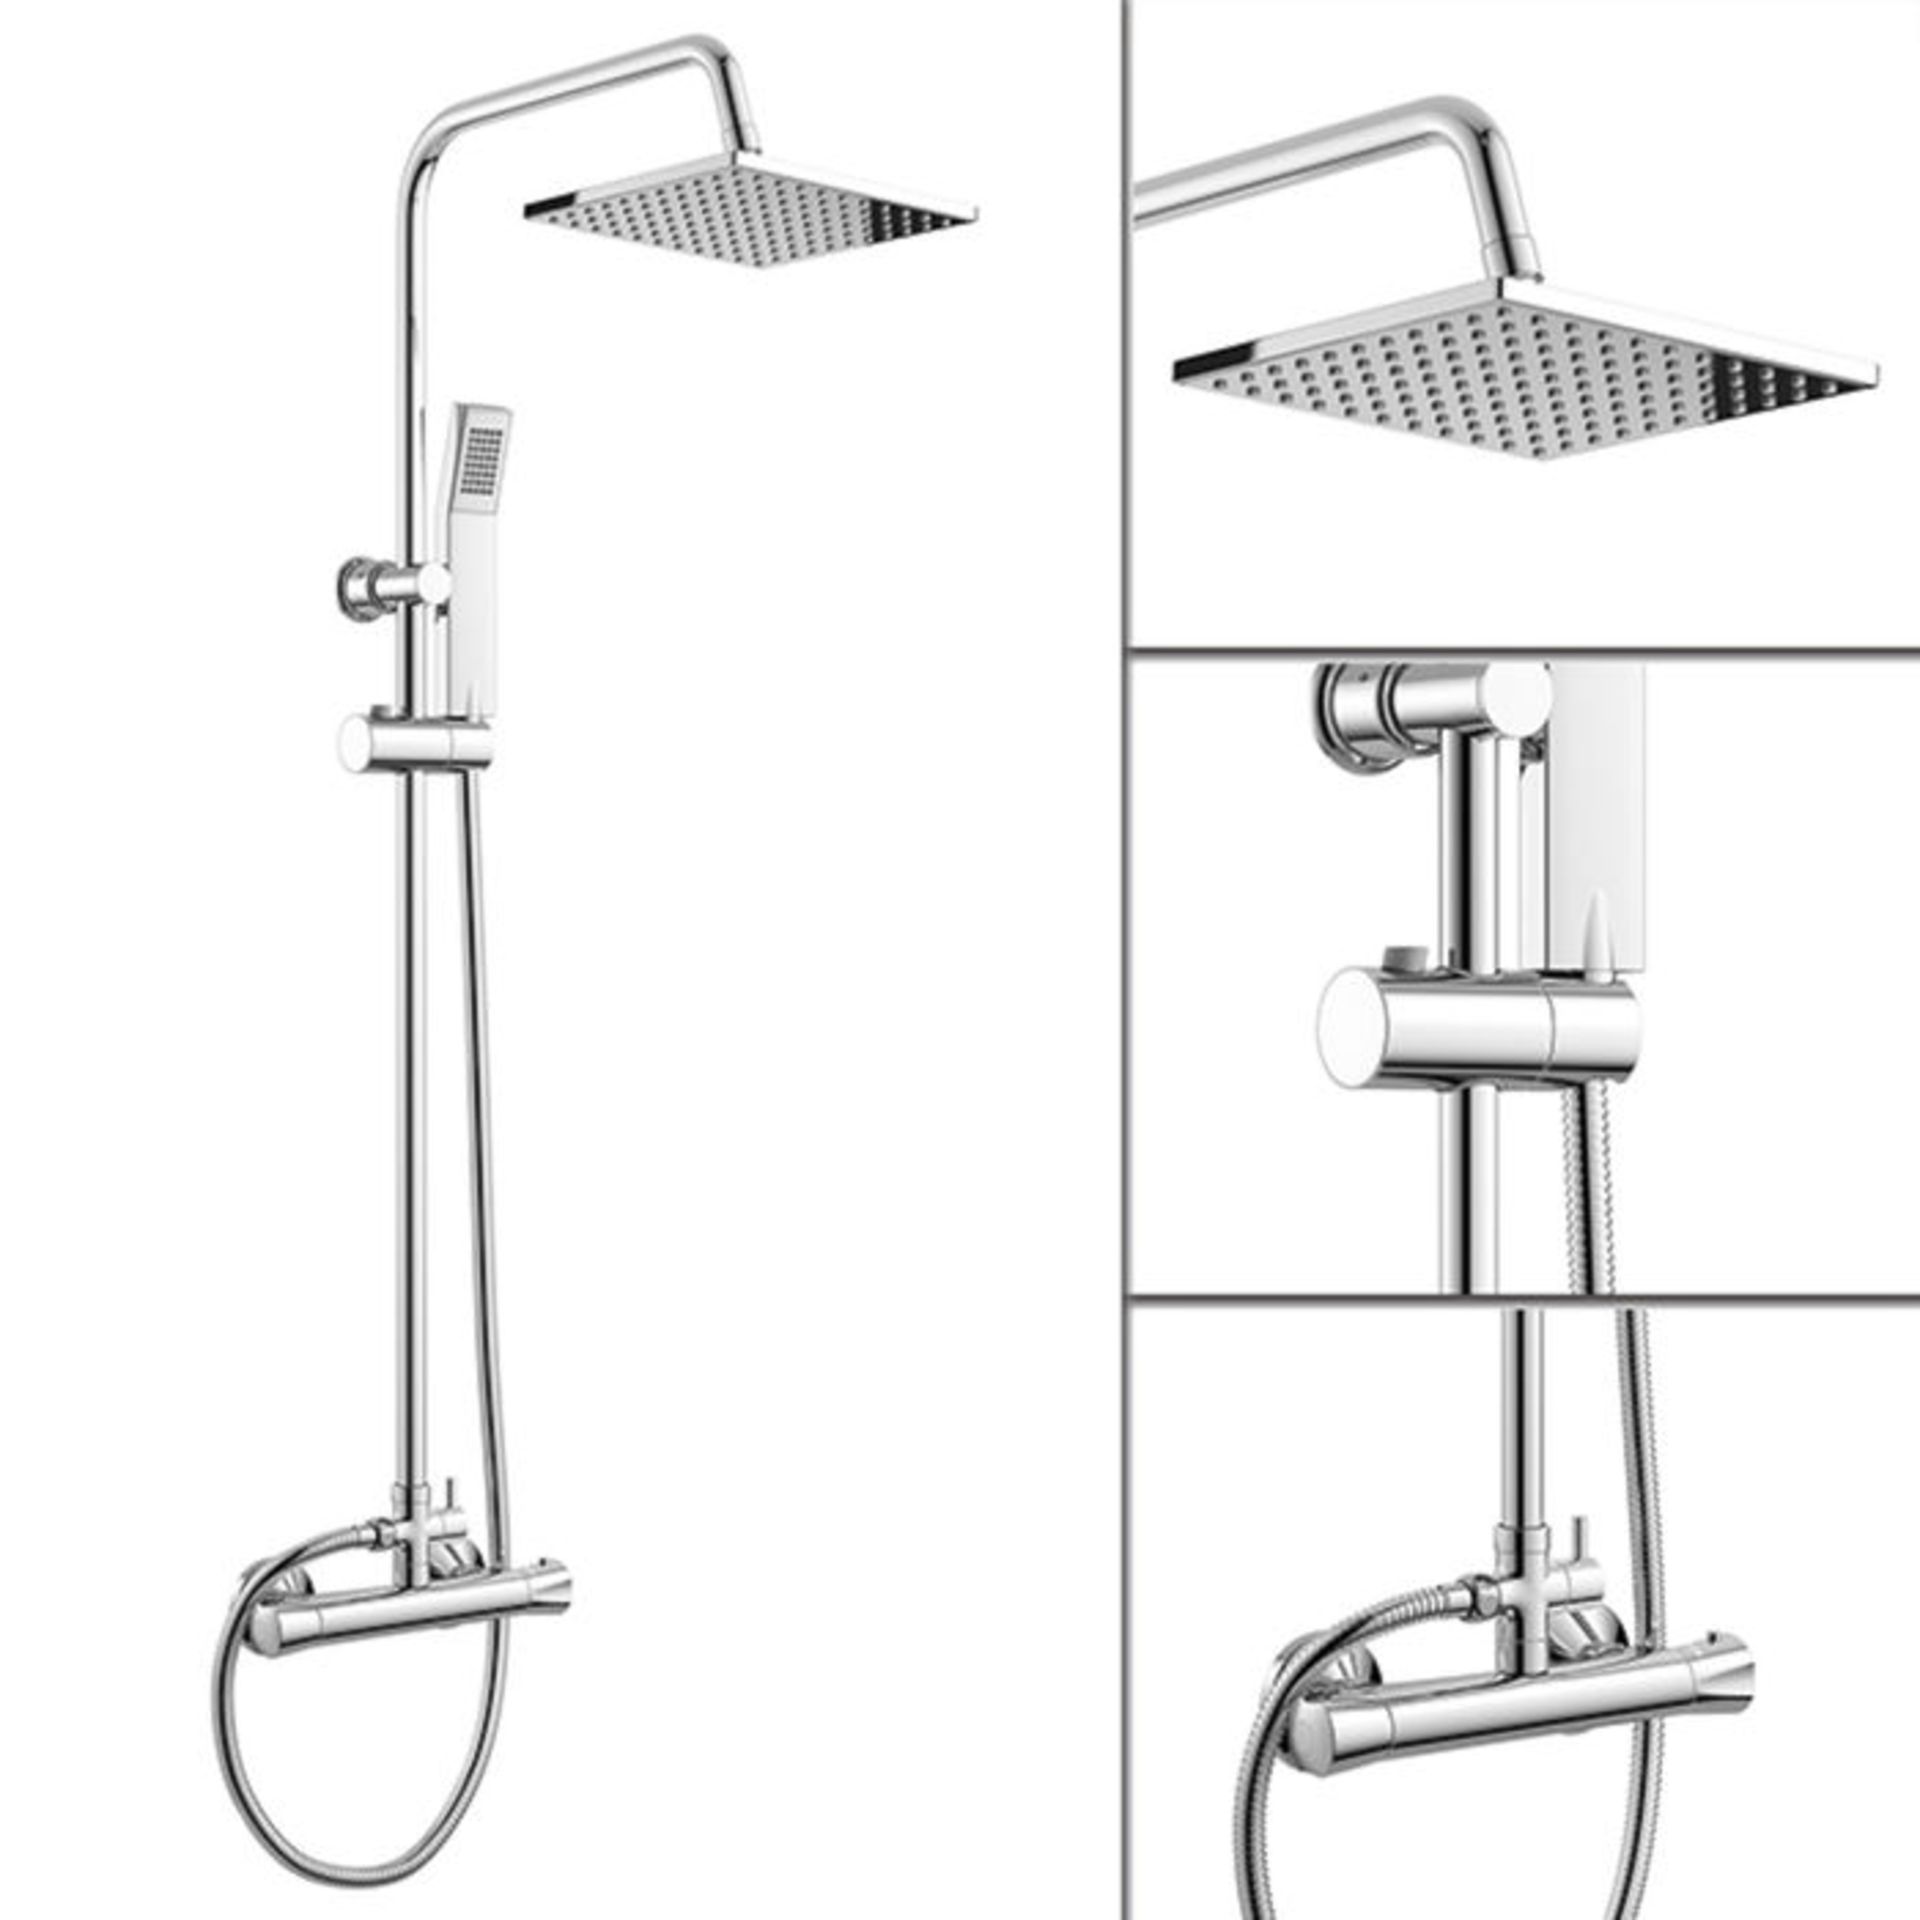 (SM2) Square Exposed Thermostatic Shower Kit & Head. Curved features and contemporary rounded valves - Image 2 of 2